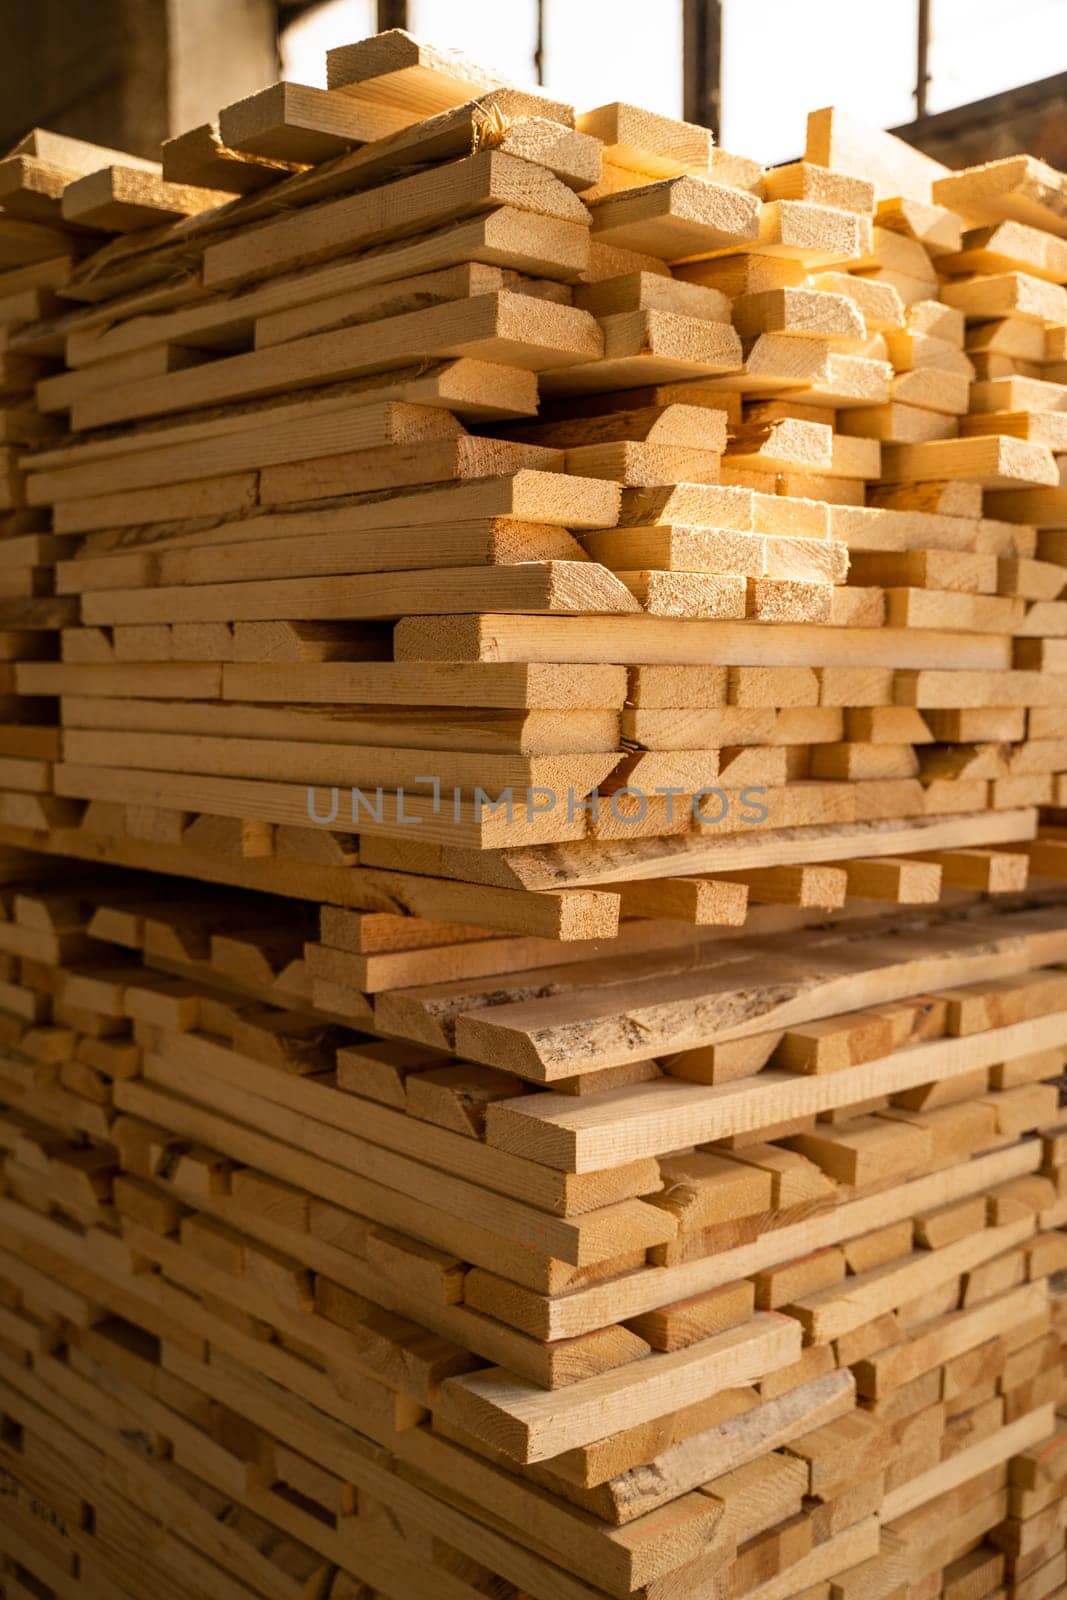 Wood processing. Stacked wooden boards at lumber warehouse in a woodworking industry. Stacks with pine lumber. Raw wood drying in the lumber warehouse. by vovsht